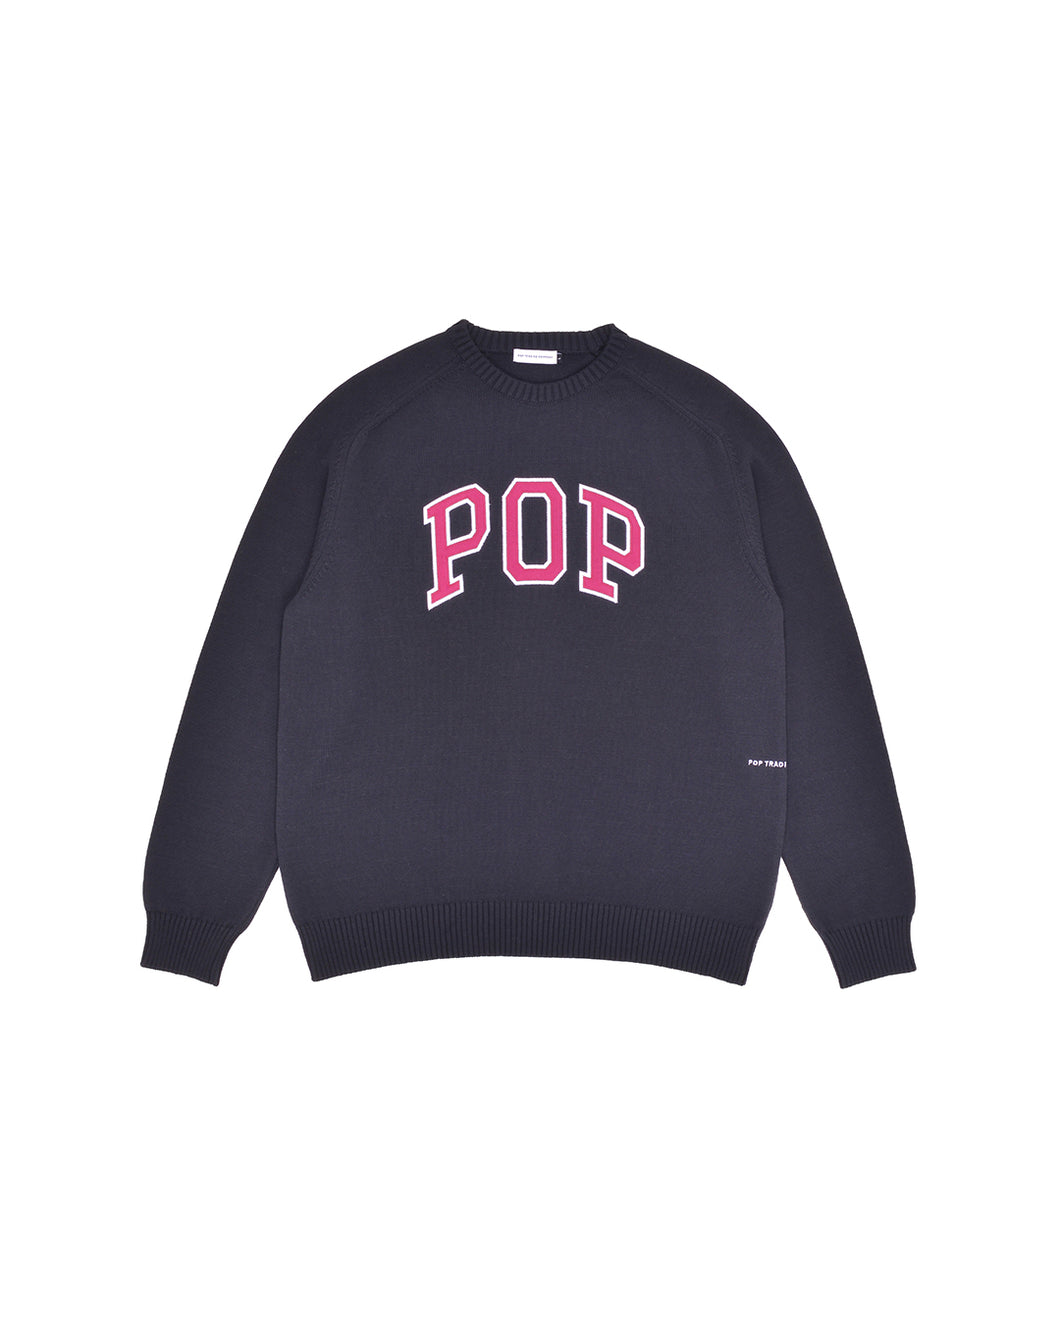 POP ARCH KNITTED CREWNECK - ANTHRACITE/RASPBERRY